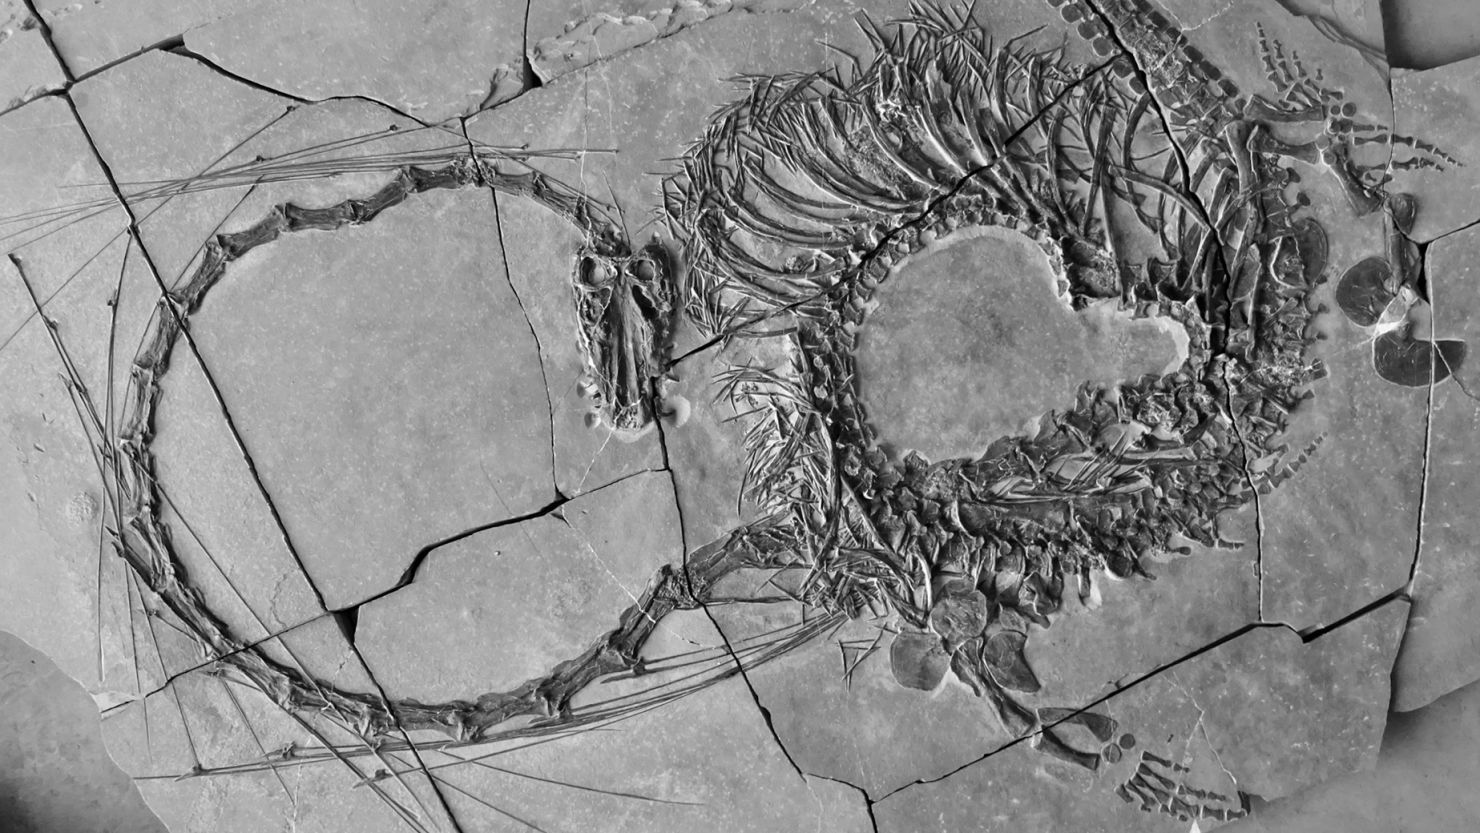 Scientists unveil 240-million-year-old 'dragon' fossil